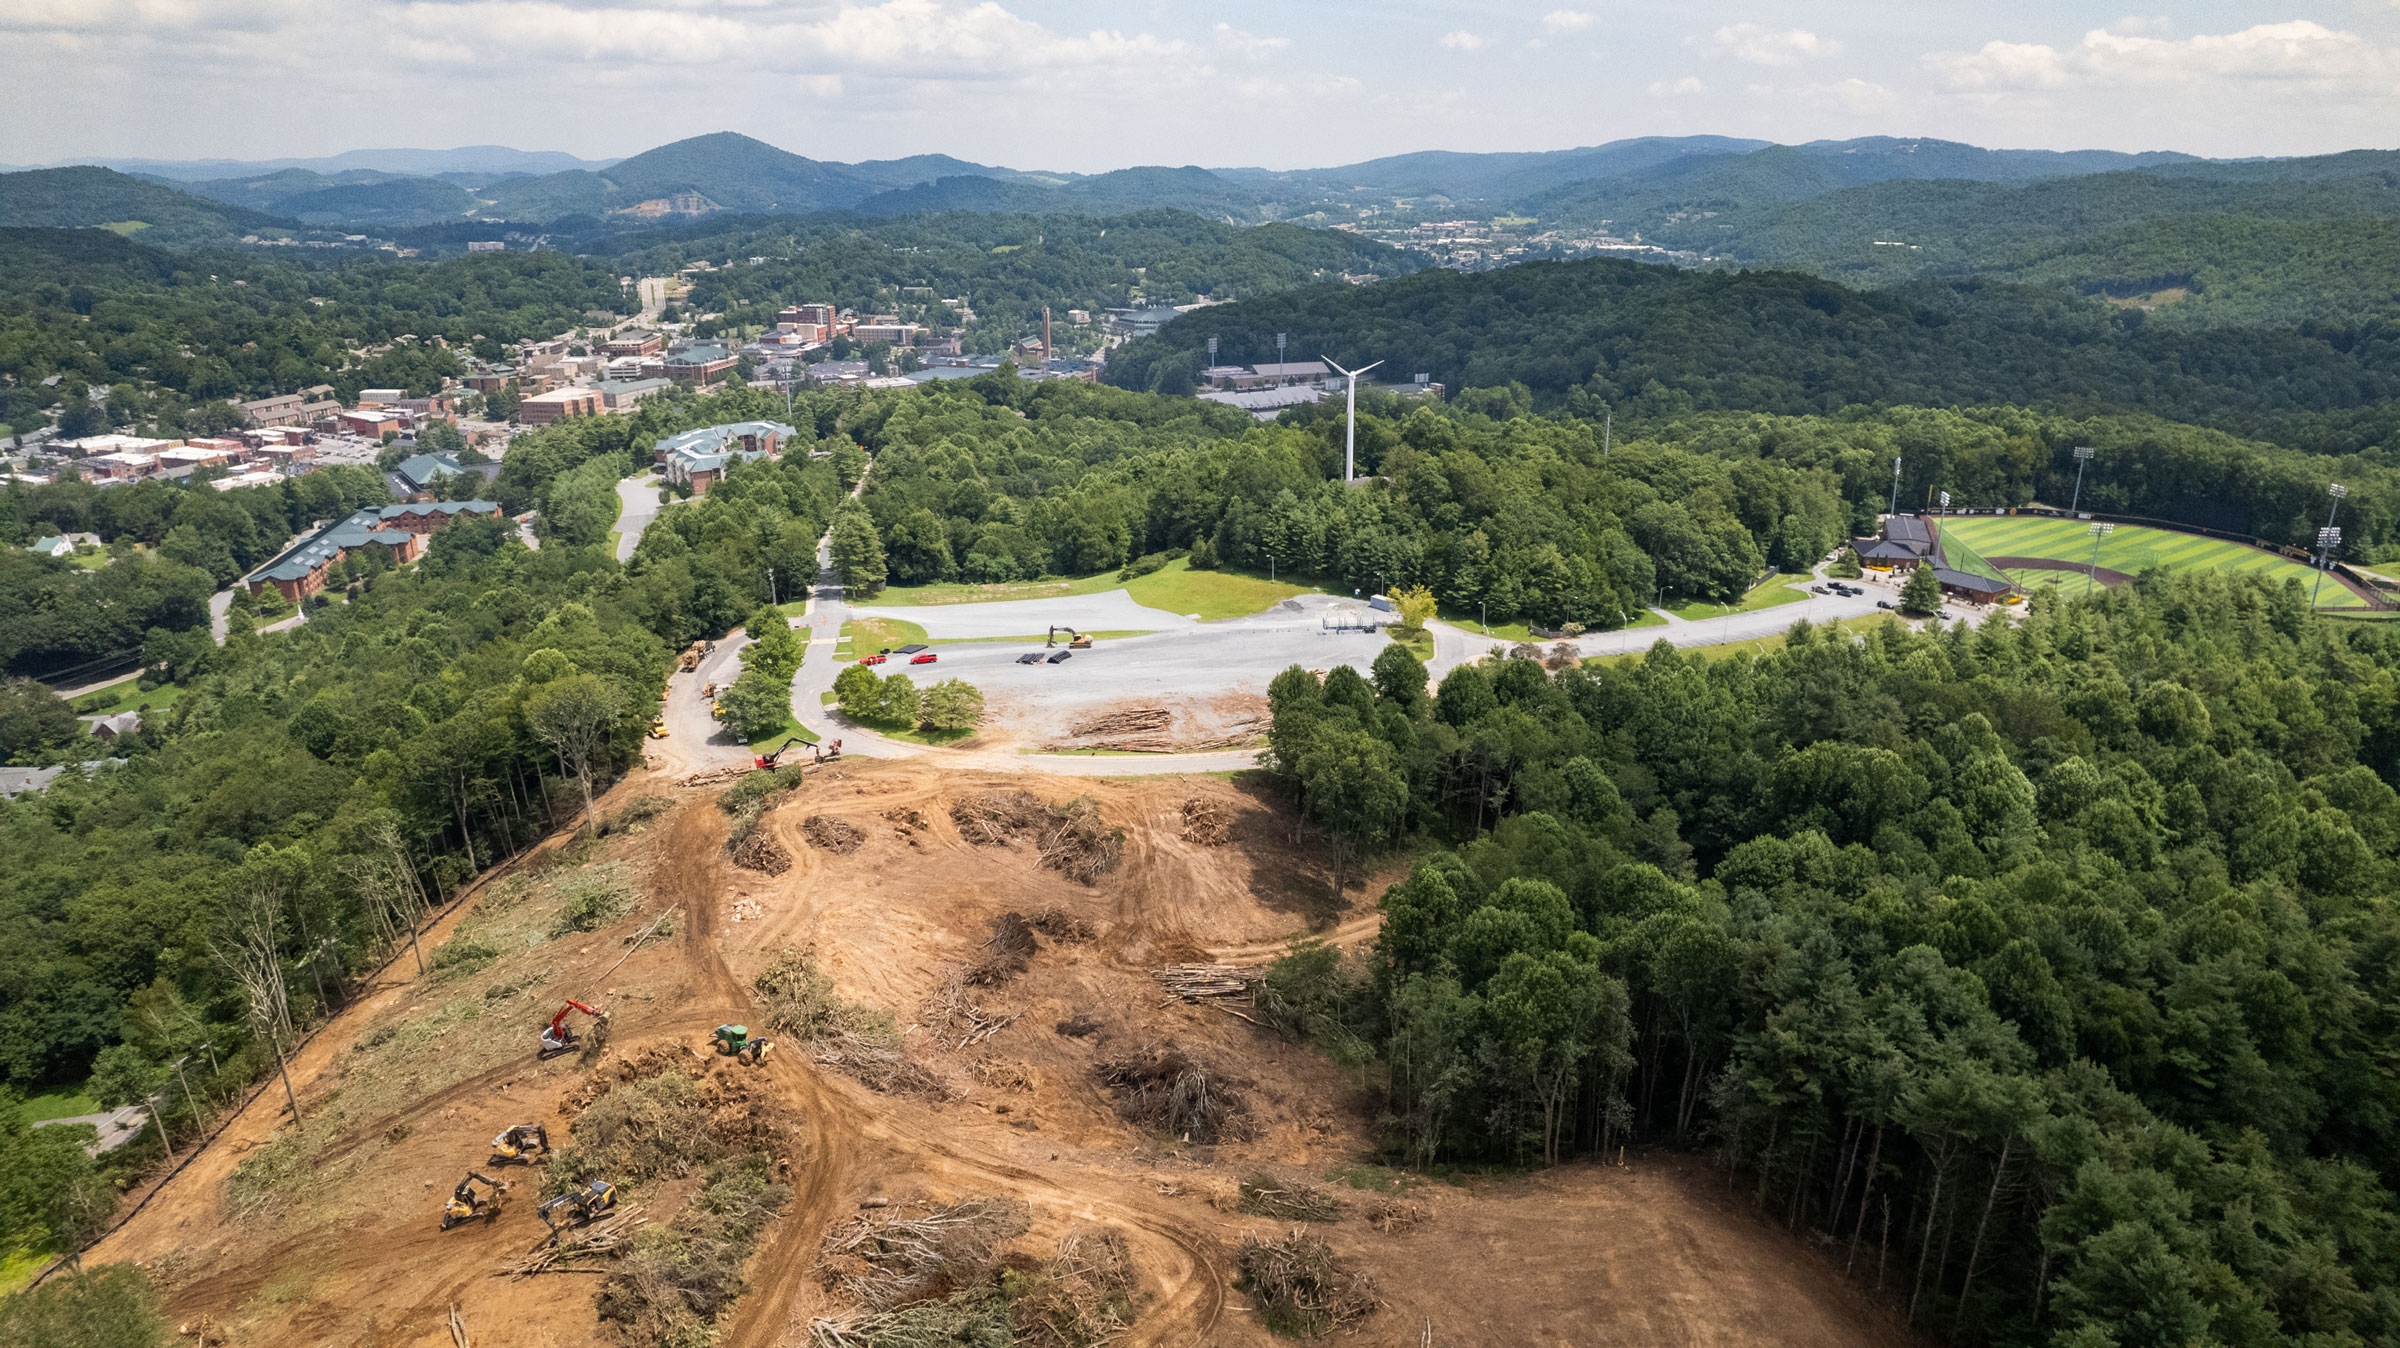 aerial photo shows the construction progress on the first phase of development for App State’s Innovation District.